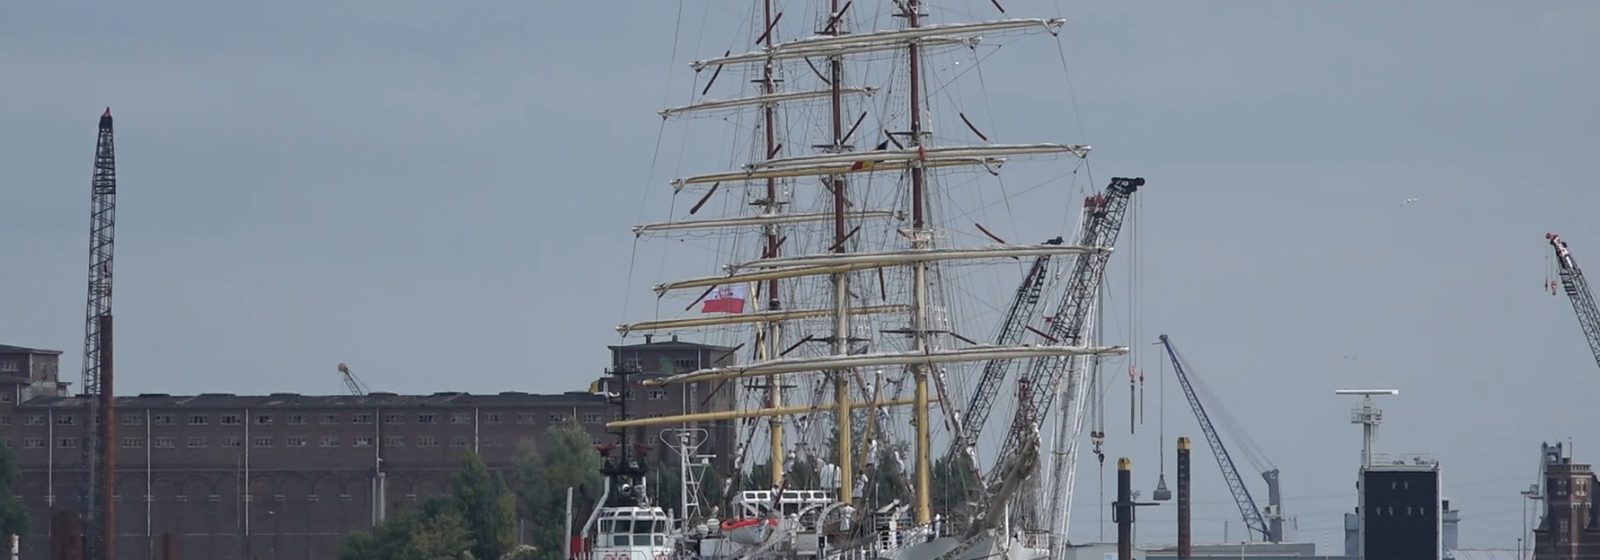 20220722 The Tall Ships Races, Antwerpen 2022